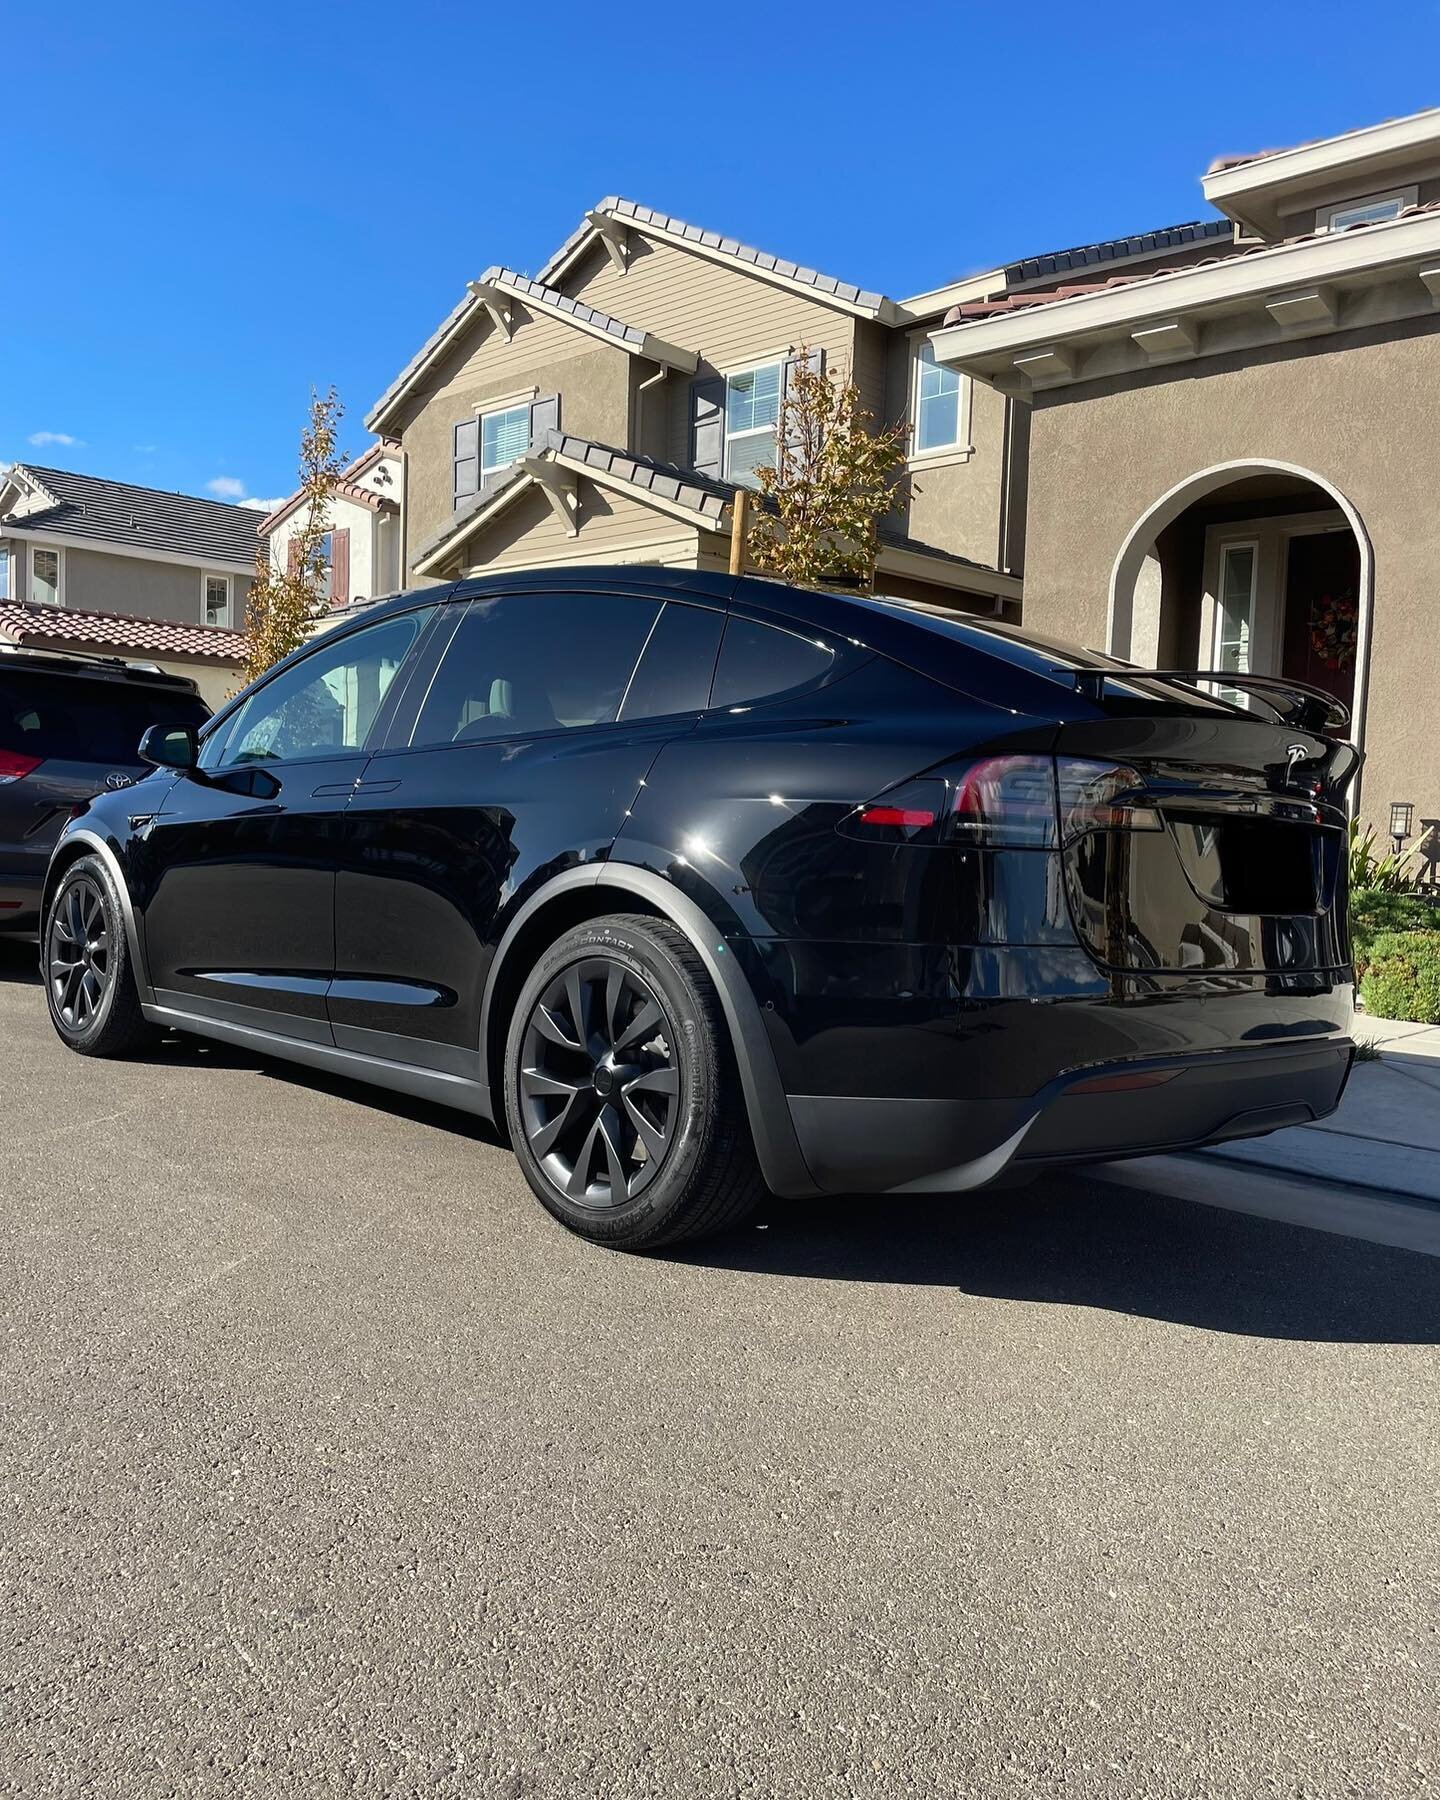 Another great looking Tesla Model X in for service! This vehicle received a paint correction &amp; a fresh layer of @adamspolishes 7-9 Year Graphene Ceramic Coating to keep the black paint shining for miles to come!&thinsp;
&thinsp;&thinsp;&thinsp;&t